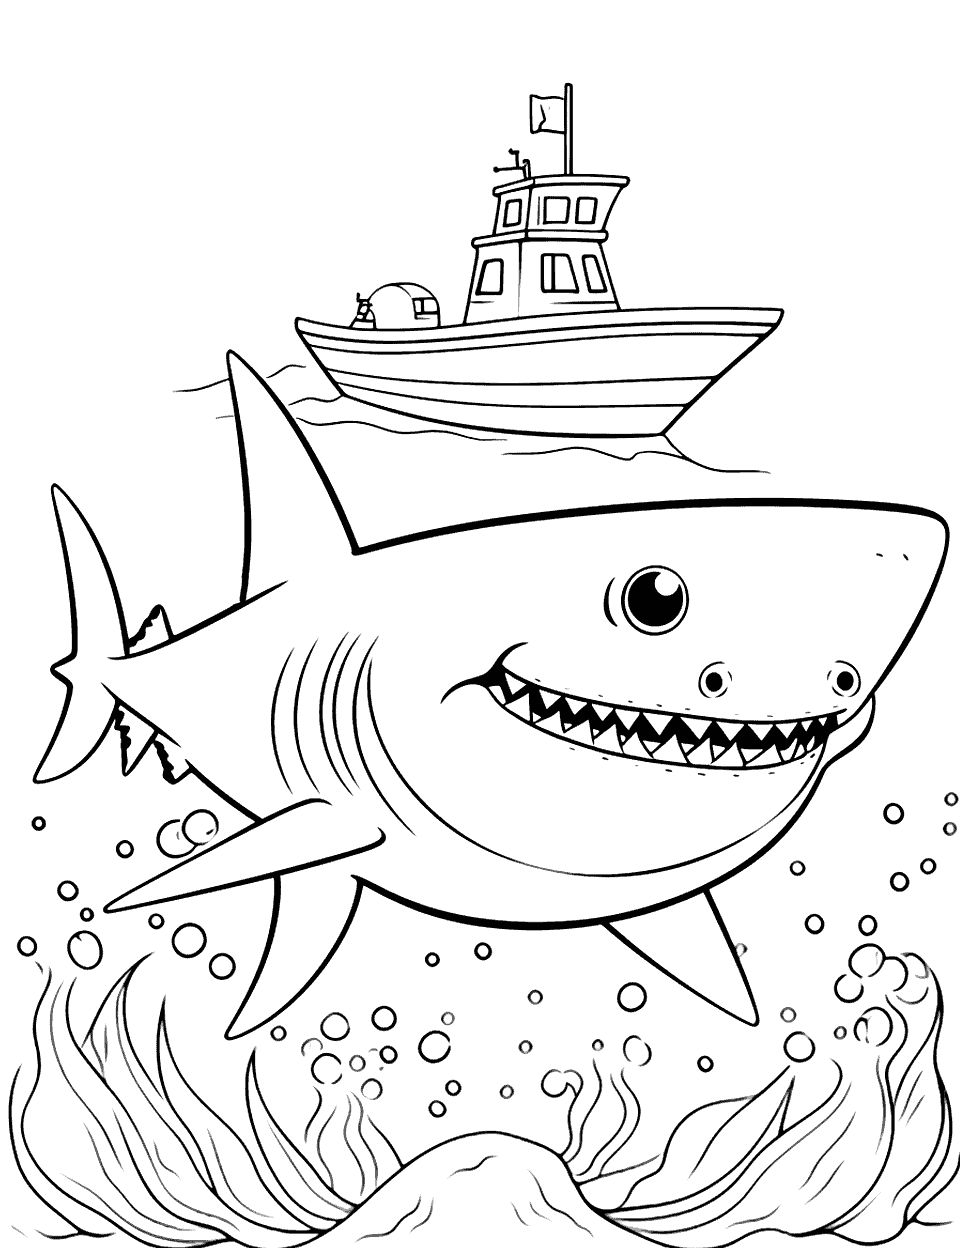 Fishing Boat and Baby Shark Coloring Page - Baby Shark curiously observing a small boat from below.